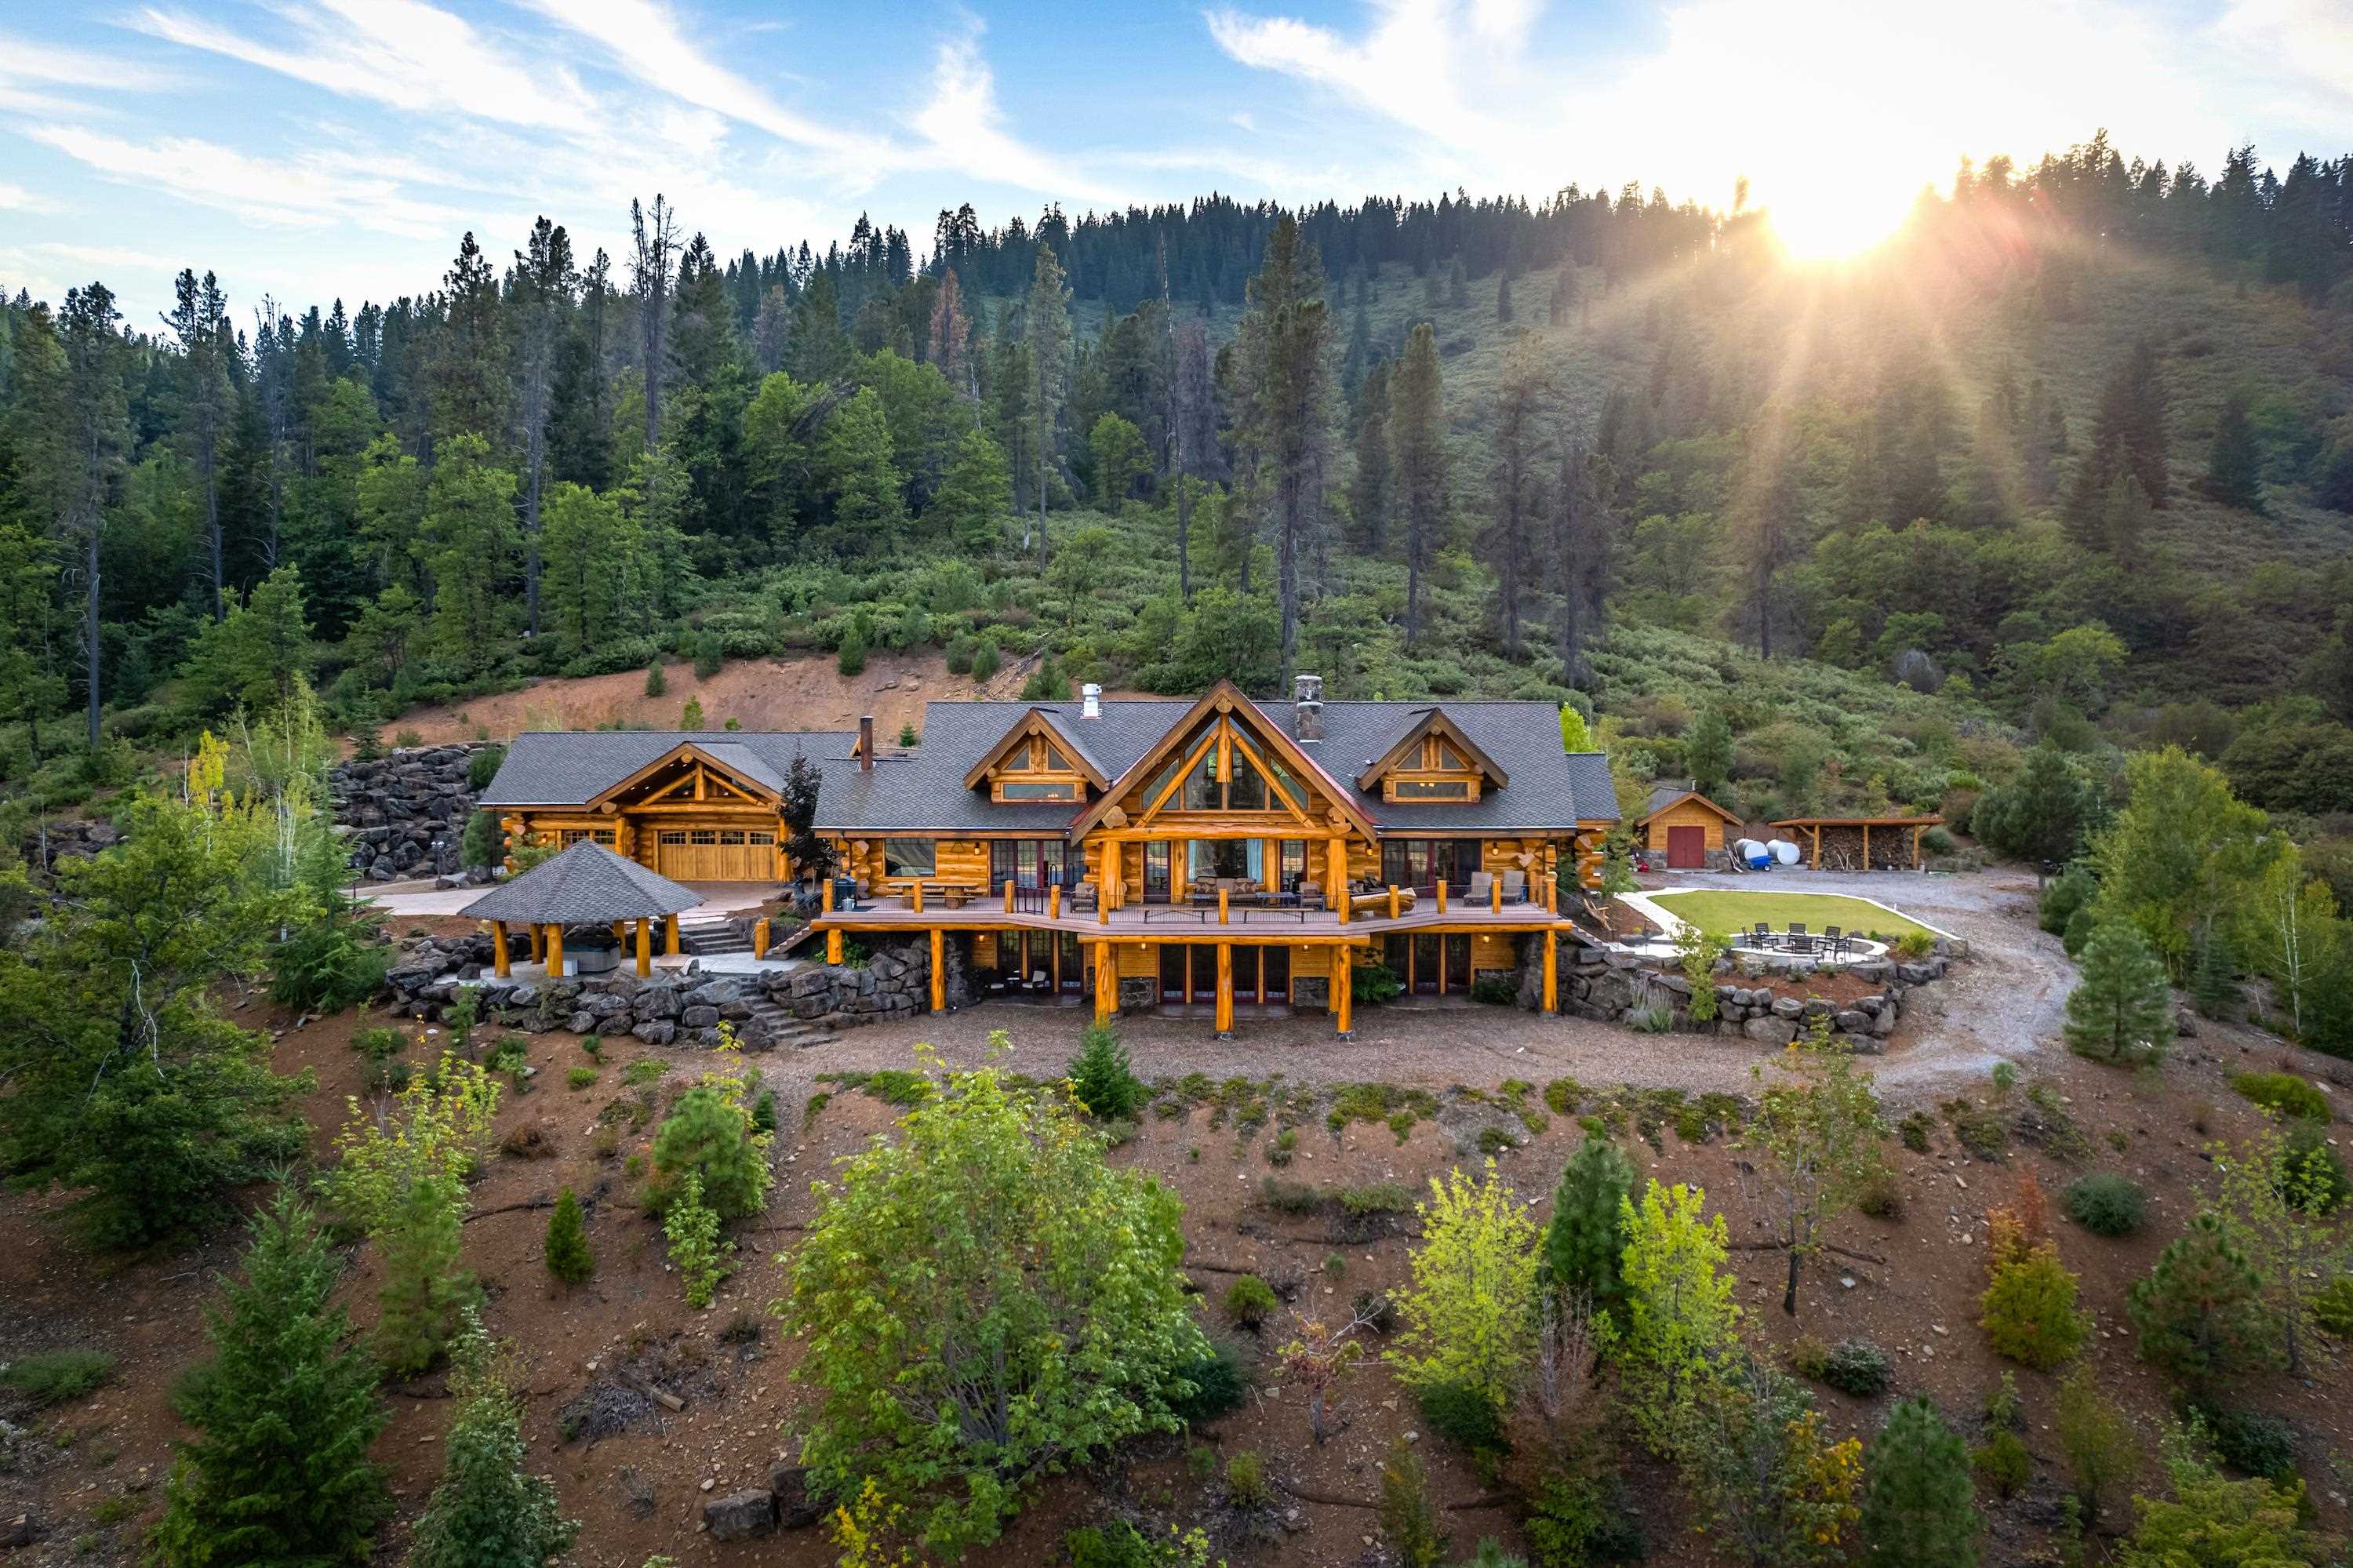 Perched at 4,000 ft. elevation in the midst of pines, oaks, and dogwoods, encompassing 55 acres with commanding views of majestic Mt. Shasta and picturesque Lake Siskiyou you will discover, Sentinel Retreat. Located just 10 minutes from downtown Mt. Shasta, this remarkable estate presents an exceptional opportunity to own a custom-built luxury Pioneer Log Home. Boasting an expansive 7,600 square feet of living space and 1,000 square feet of guest quarters above the garage, coupled with a 1,700 square foot outdoor deck, this log home offers a harmonious blend of rustic elegance and mountain casual luxury. With three levels, four spacious bedrooms, three full bathrooms, and one-half bath, there is ample room to accommodate family, friends, and guests. There is a great deal of craftsmanship to be seen throughout the home. Whether it’s the meticulously hand-carved mighty eagle above the front door or the wooden bears climbing the 20-foot “feature tree” that greets you as you enter Sentinel Retreat, no details are spared. No matter the season, right outside your front door or just a short drive away, outdoor recreation abounds - hiking, biking, climbing, swimming, canoeing, & kayaking.